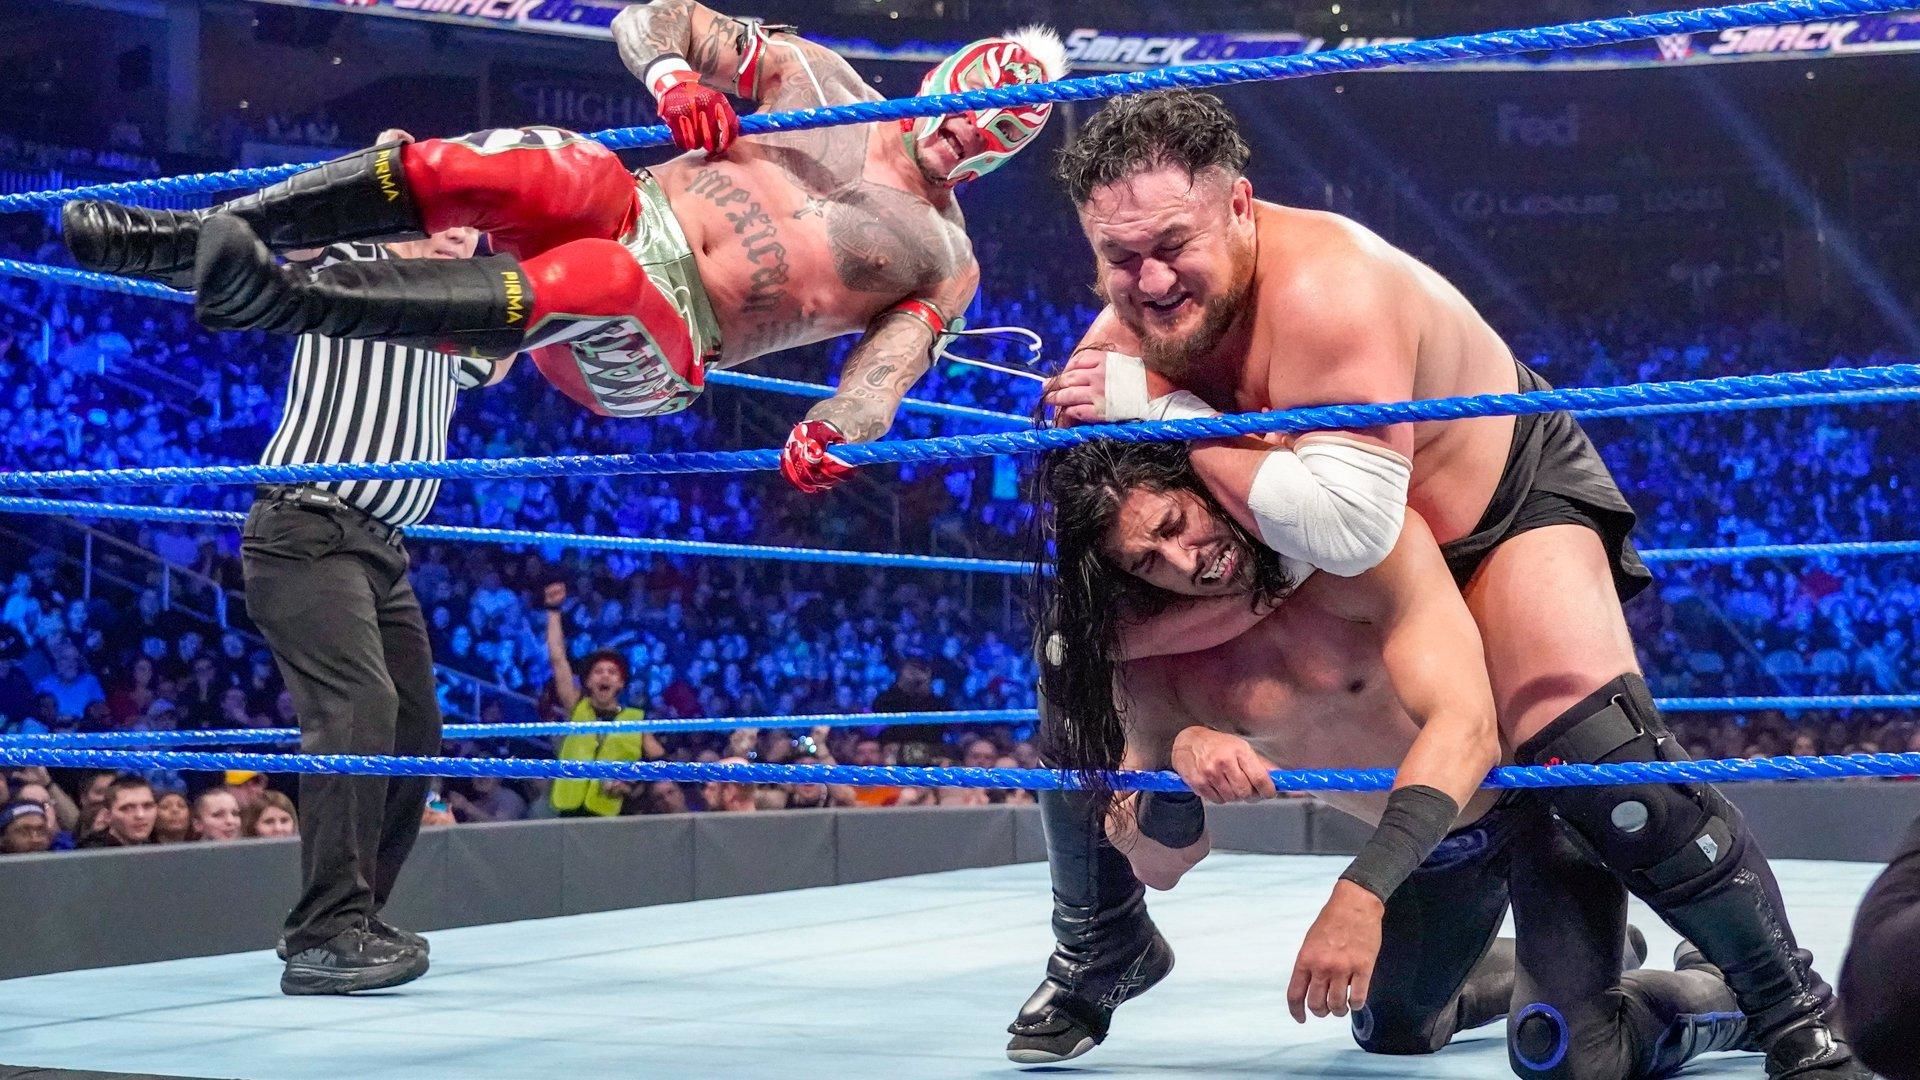 WWE Friday Night SmackDown! Show Summary, Episodes and TV